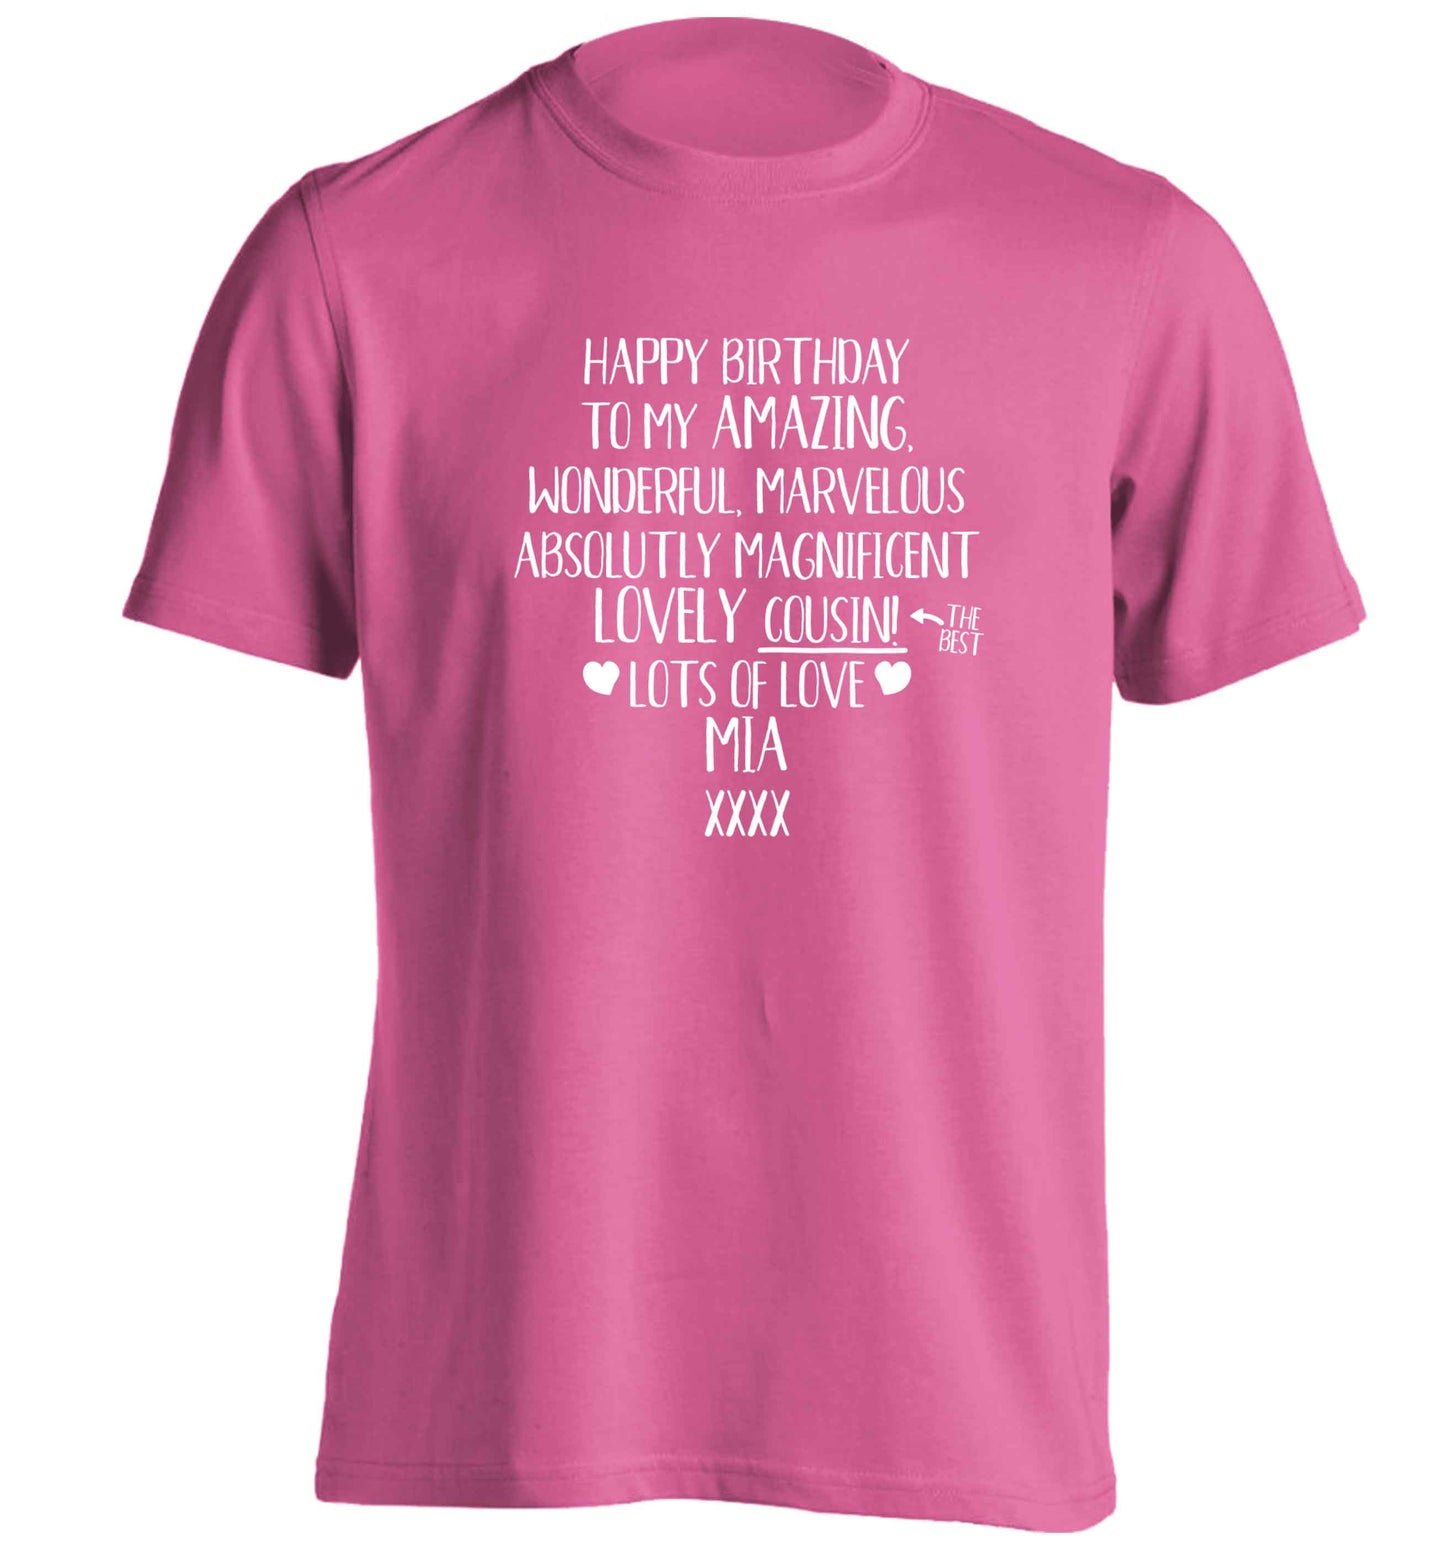 Personalised happy birthday to my amazing, wonderful, lovely cousin adults unisex pink Tshirt 2XL